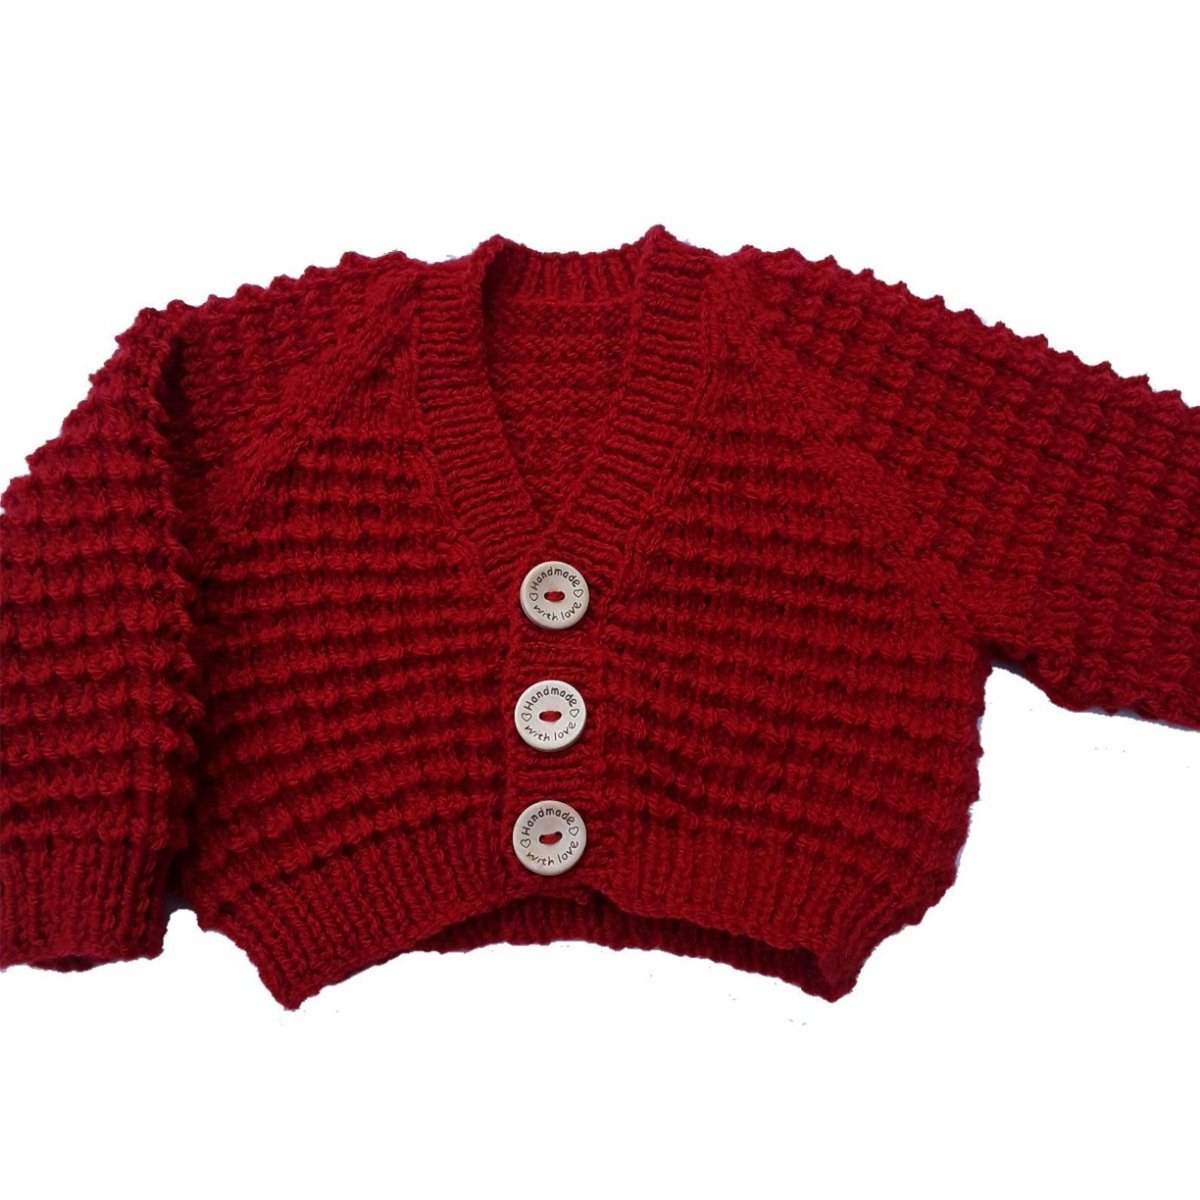 Discover the charm of handmade with this fox red brown baby cardigan. Exquisitely knitted, perfect for 0-3 months old or reborn dolls. It's just one click away on #Etsy knittingtopia.etsy.com/listing/168537… #knittingtopia #handmade #craftbizparty #MHHSBD #babyessentials #shophandmade